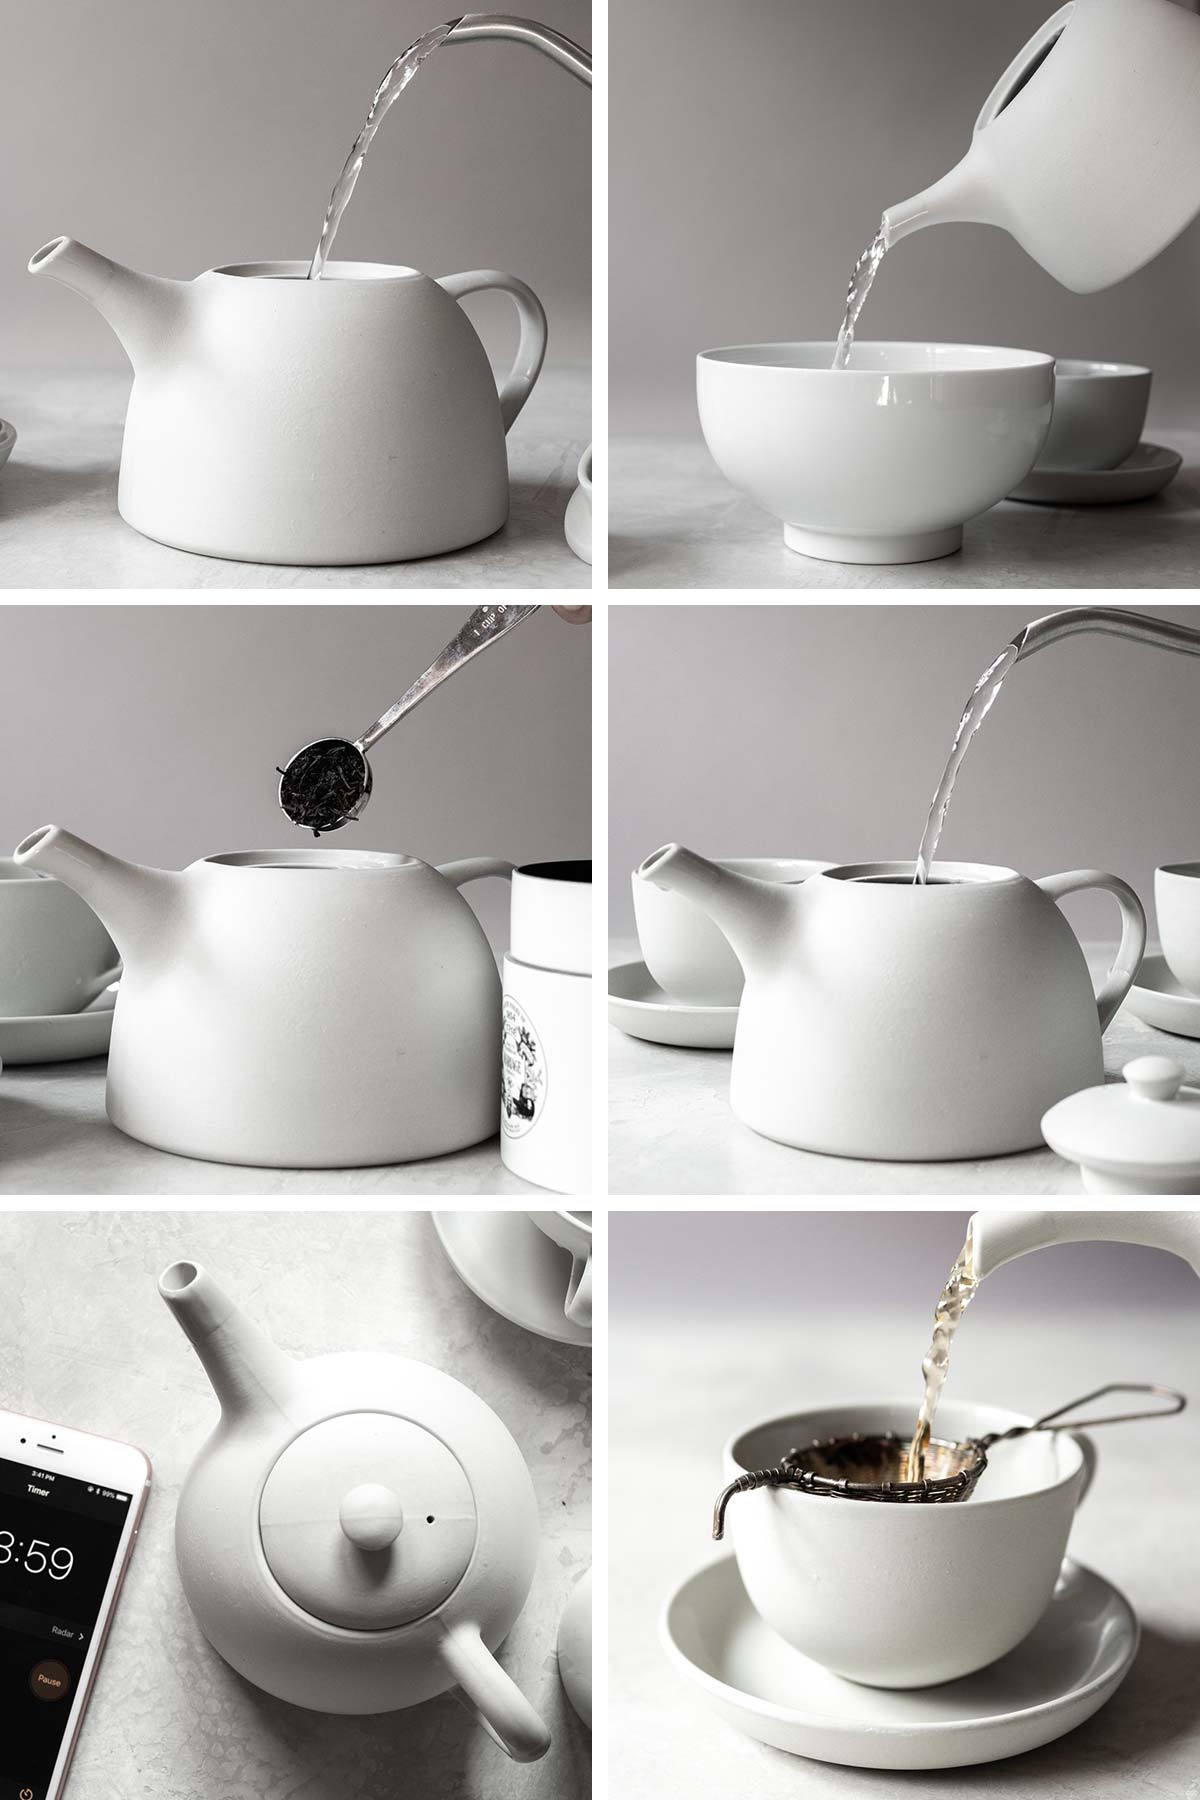 6 photos showing step-by-step instructions for making tea.